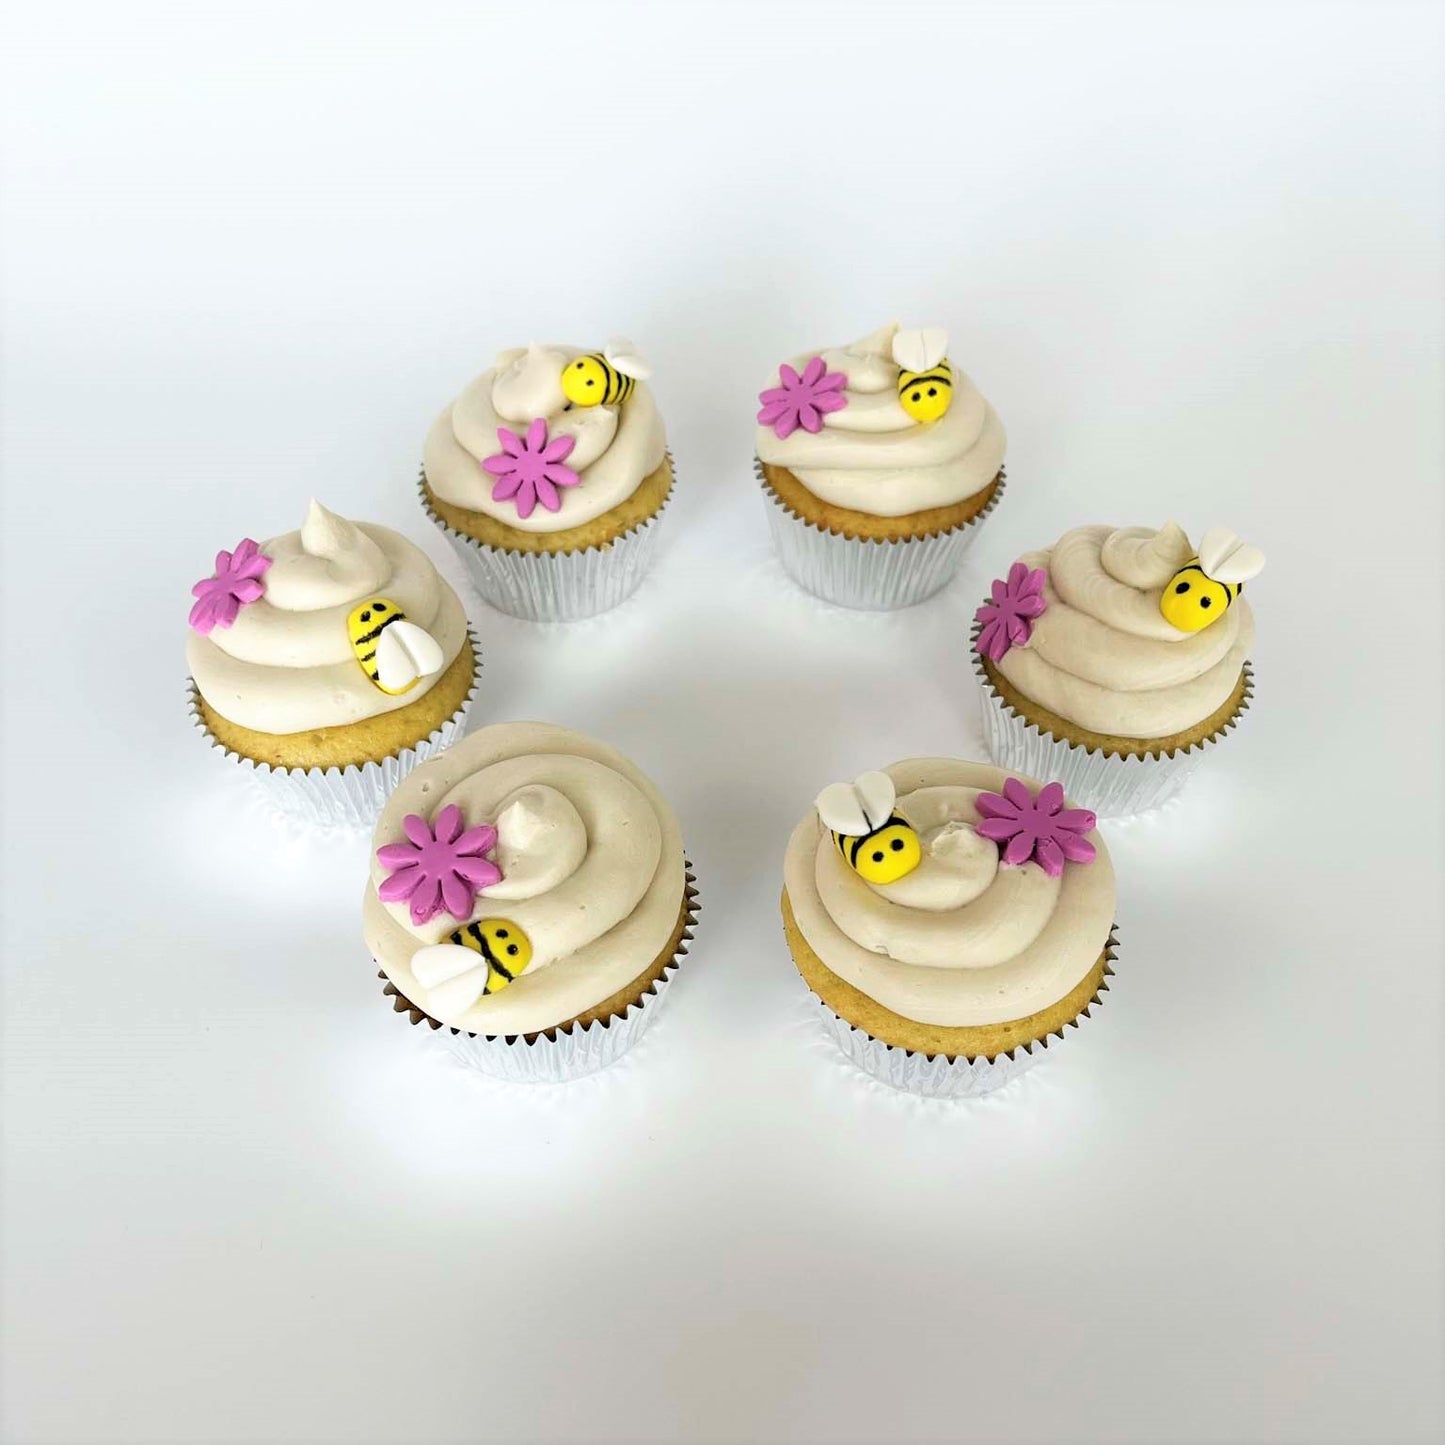 Finished bee-themed DIY cupcakes form a circle, each with a mound of white frosting on top that looks a honeycomb. Pink fondant flowers and yellow, pill-shaped fondant bees with white heart-shaped wings are on top of the frosting. Drawn in black edible marker are two dots for the bees' eyes and three black stripes along the bees' bodies.